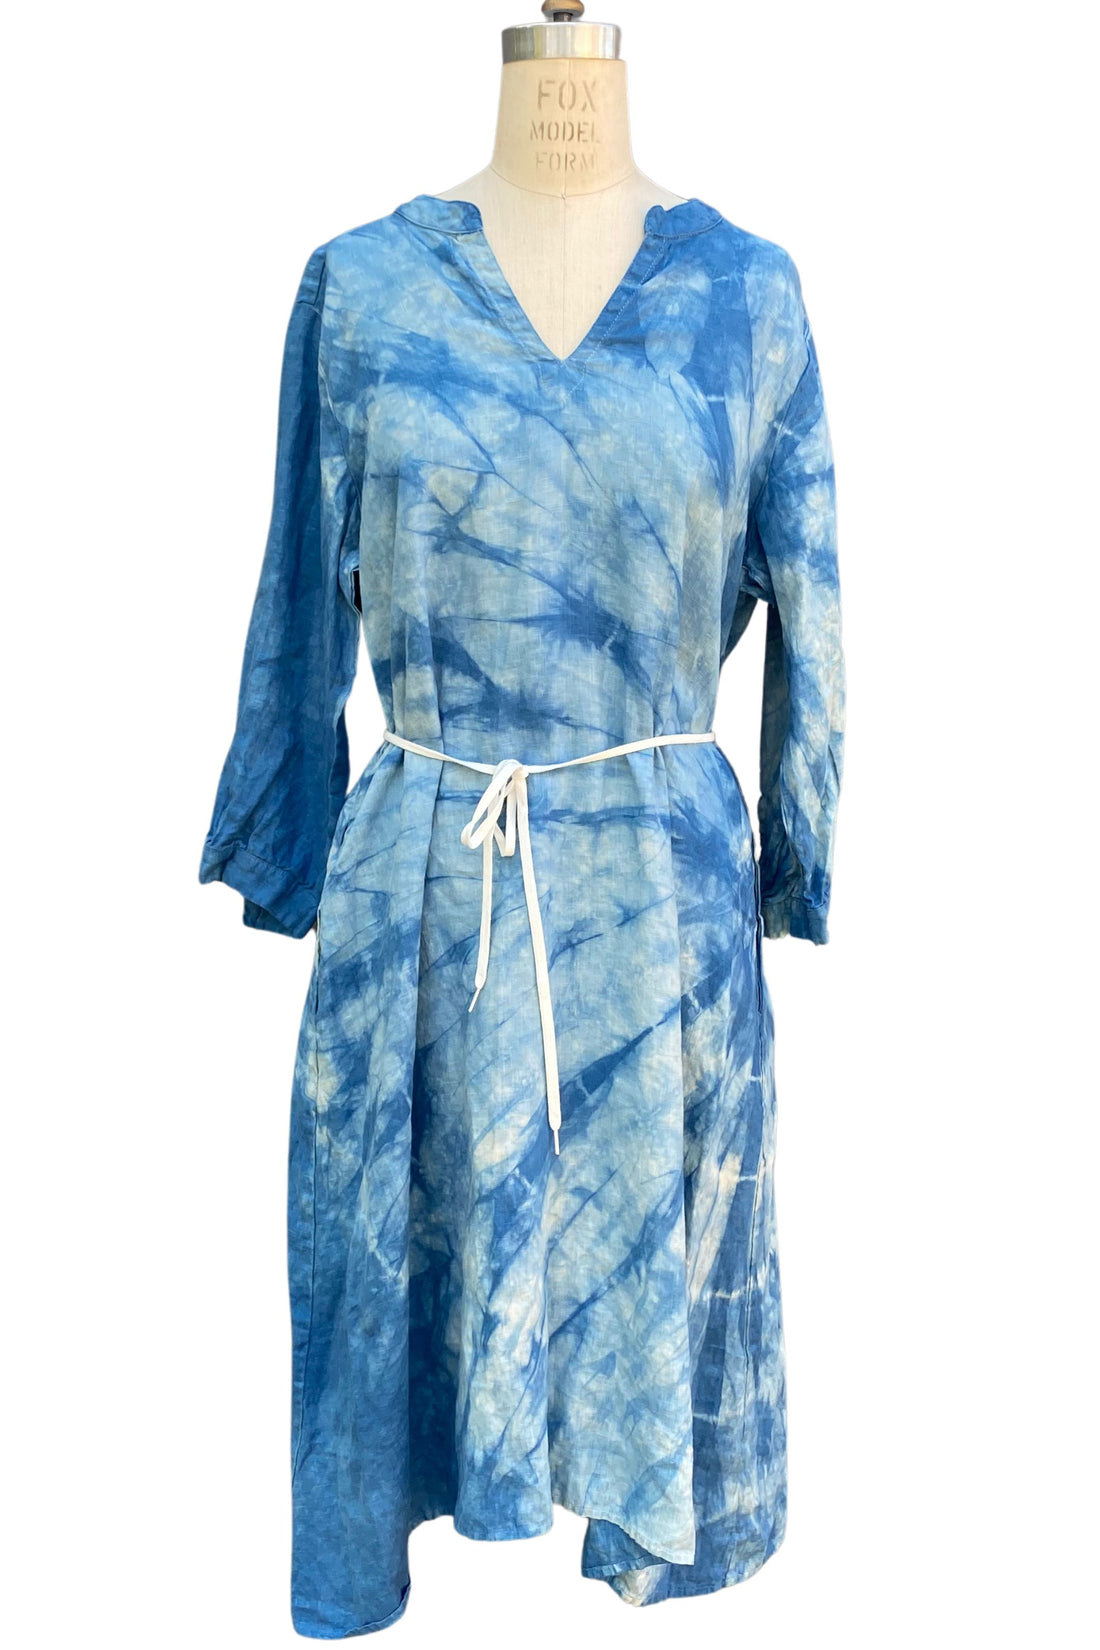 Blue Organic Cotton Celeste Dress with Pockets - The Perfect Dress for Every Occasion |  Ripple